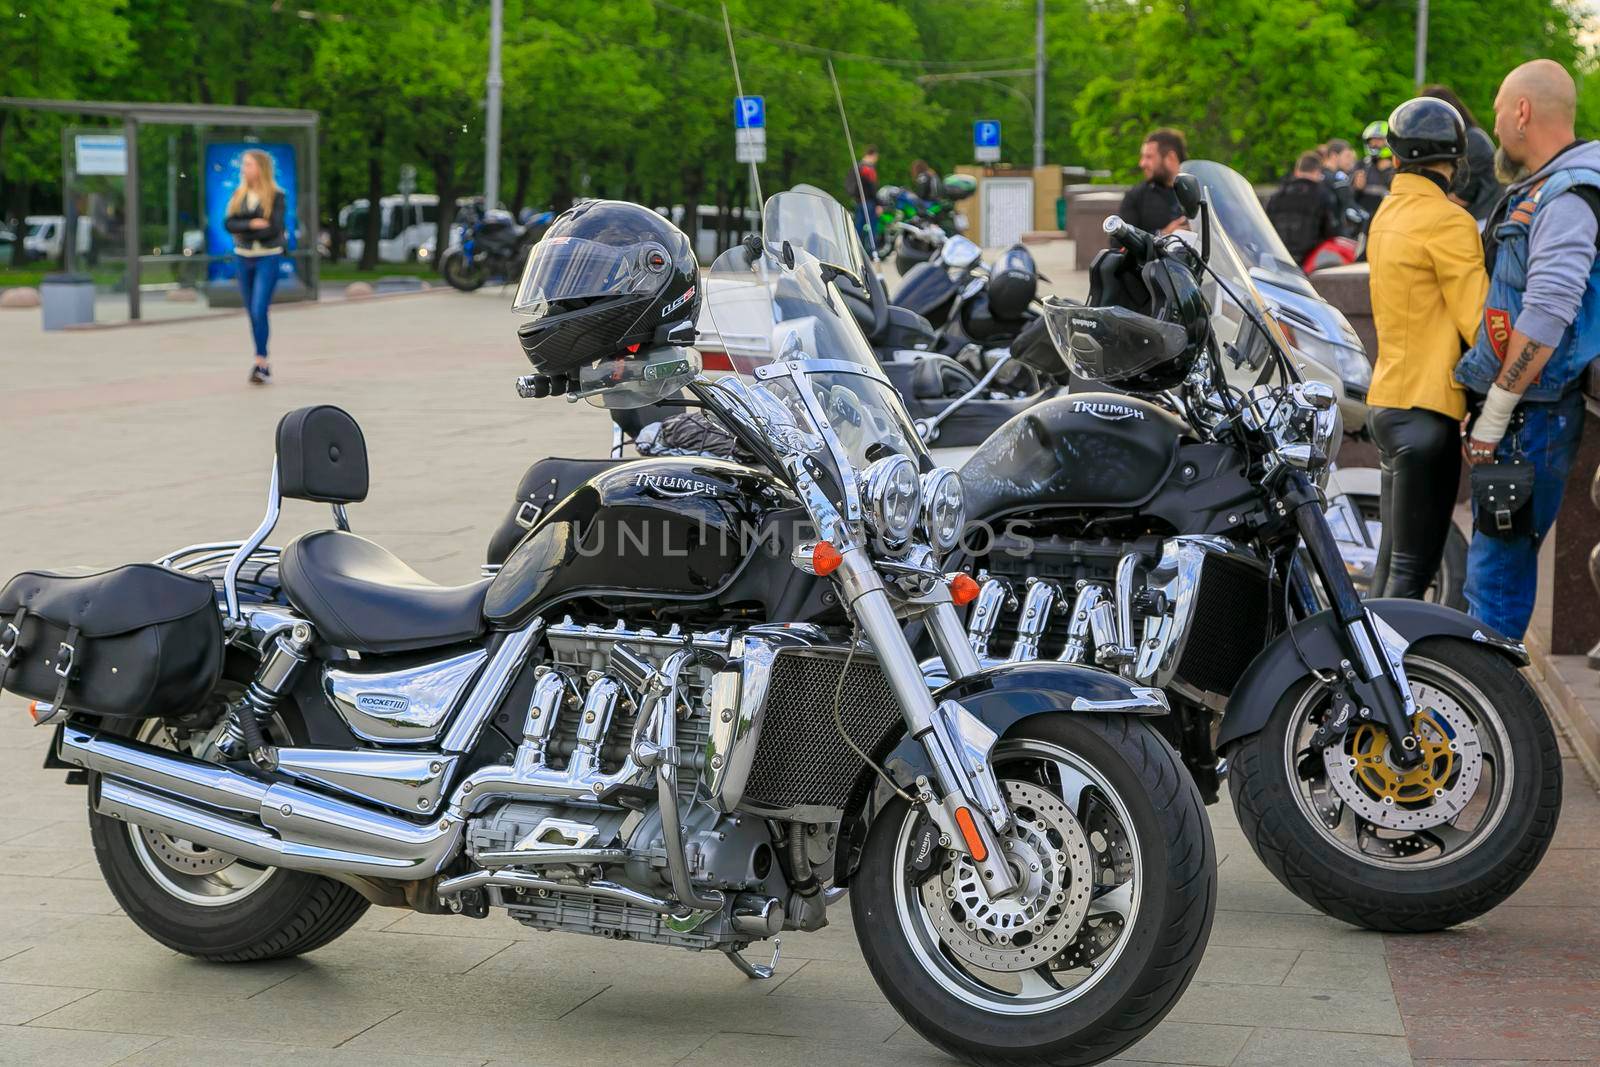 Beautiful motorcycles bikers are parked outdoors in the park. Moscow, Russia, May 13, 2019